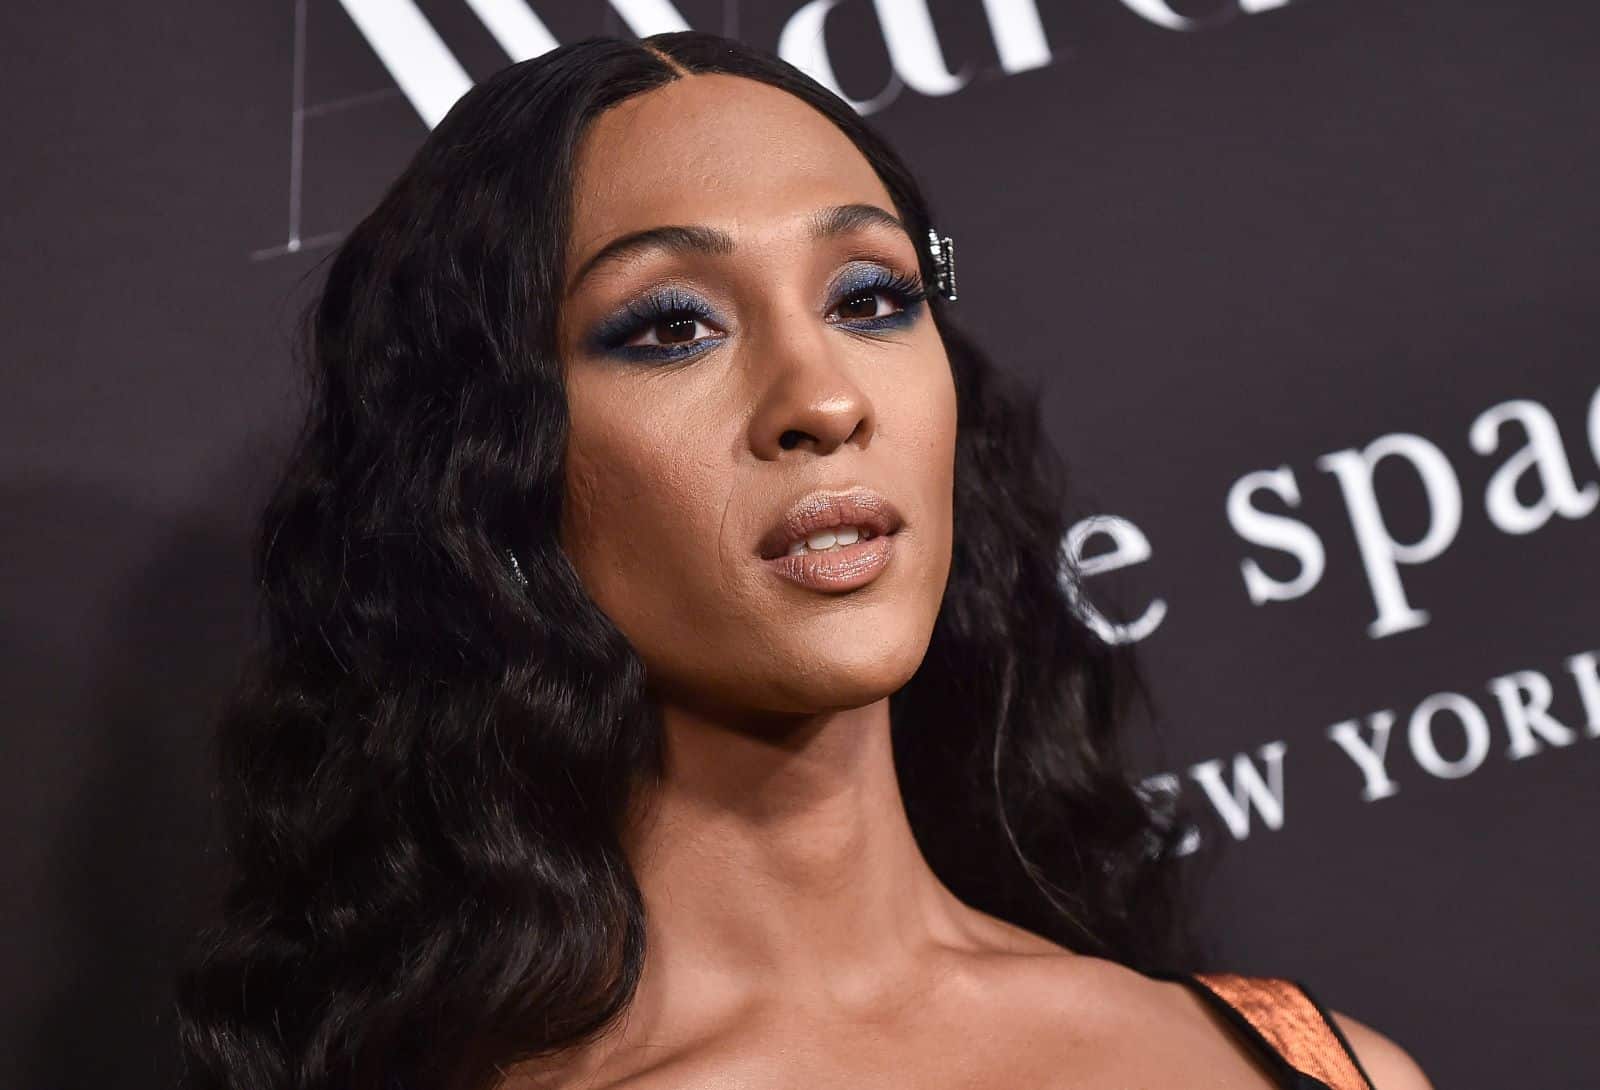 <p class="wp-caption-text">Image Credit: Shutterstock / DFree</p>  <p><span>MJ Rodriguez’s role in “Pose” has been groundbreaking, earning her critical acclaim and a Golden Globe nomination. While Rodriguez has faced discrimination, her success marks a significant step forward for transgender actors of color in leading roles.</span></p>